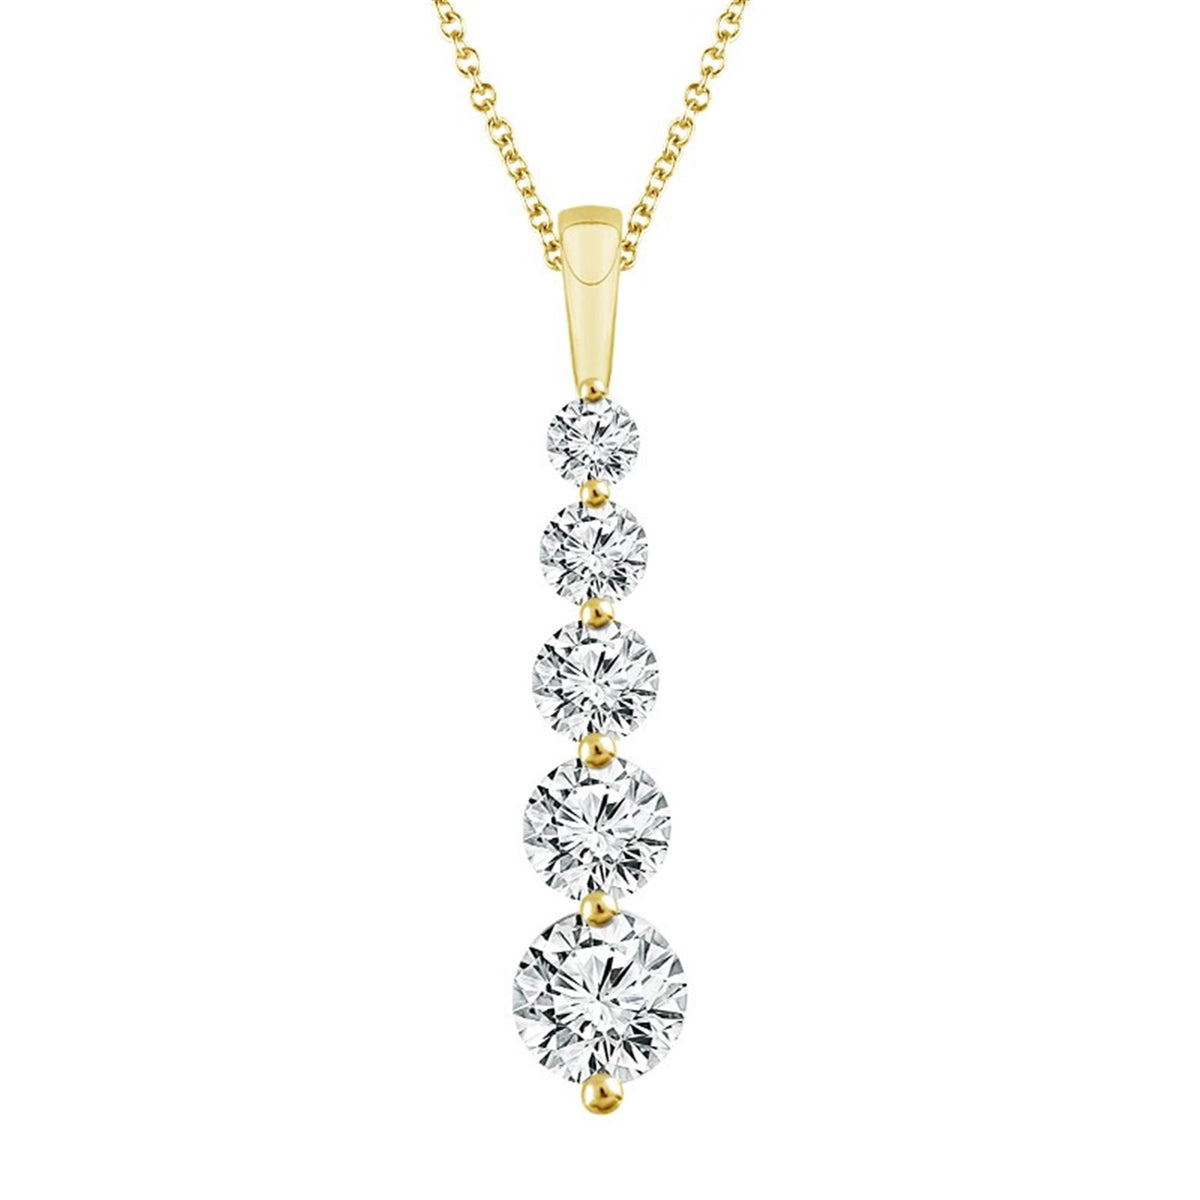 14Kt Yellow Gold Journey Pendant with 1.00cttw Natural Diamonds